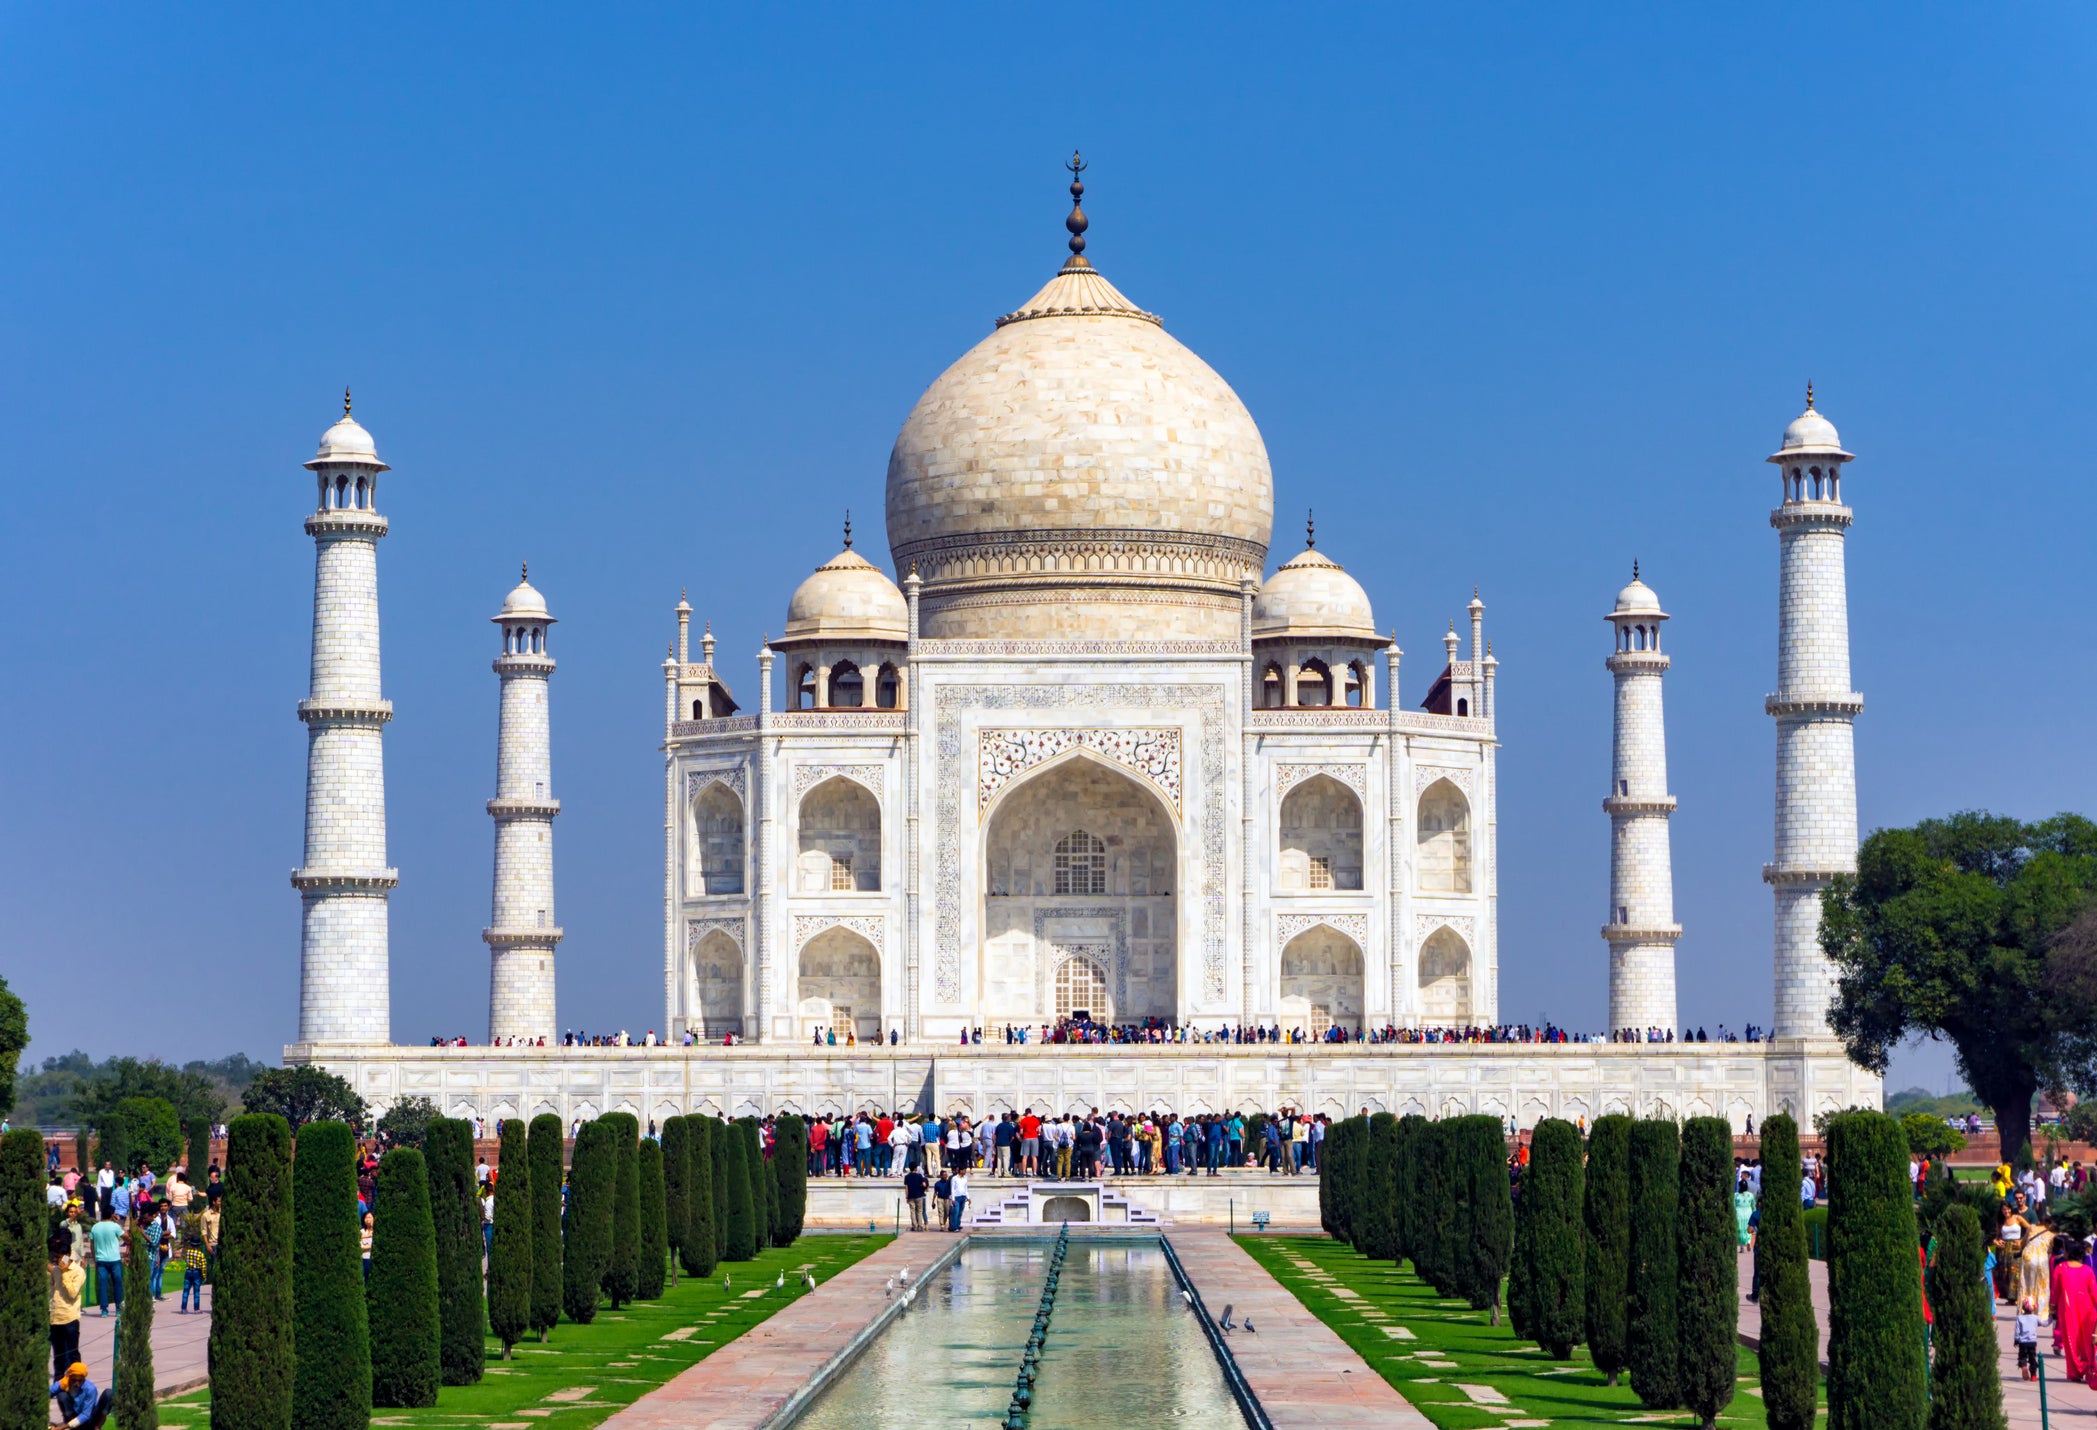 Taj Mahal Visitors Will Be Fined for Staying Longer Than 3 Hours - The